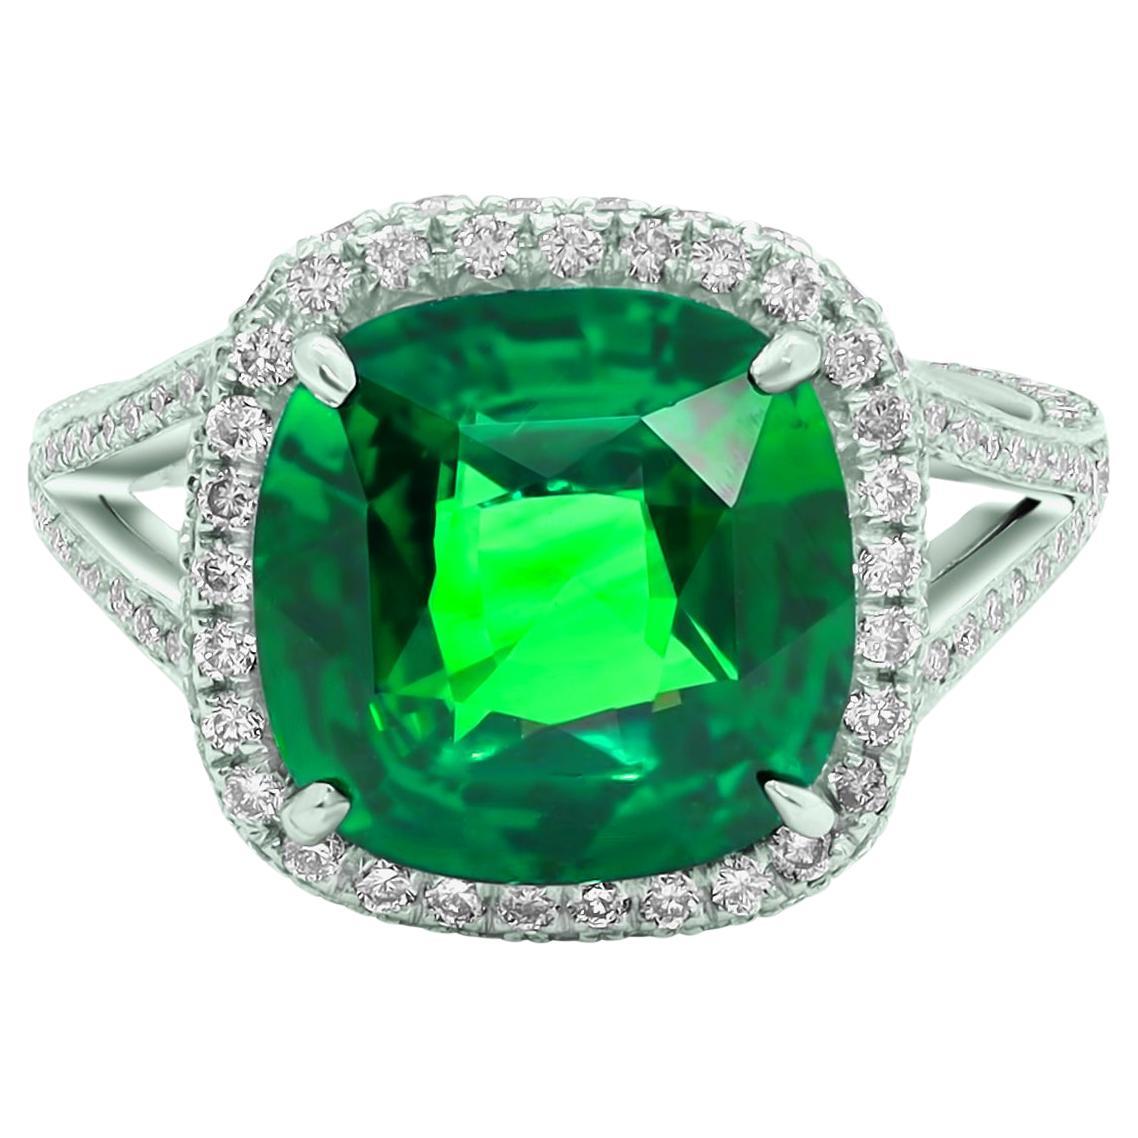 Diana M. 18 kt white gold emerald diamond ring featuring a 6.63 ct 